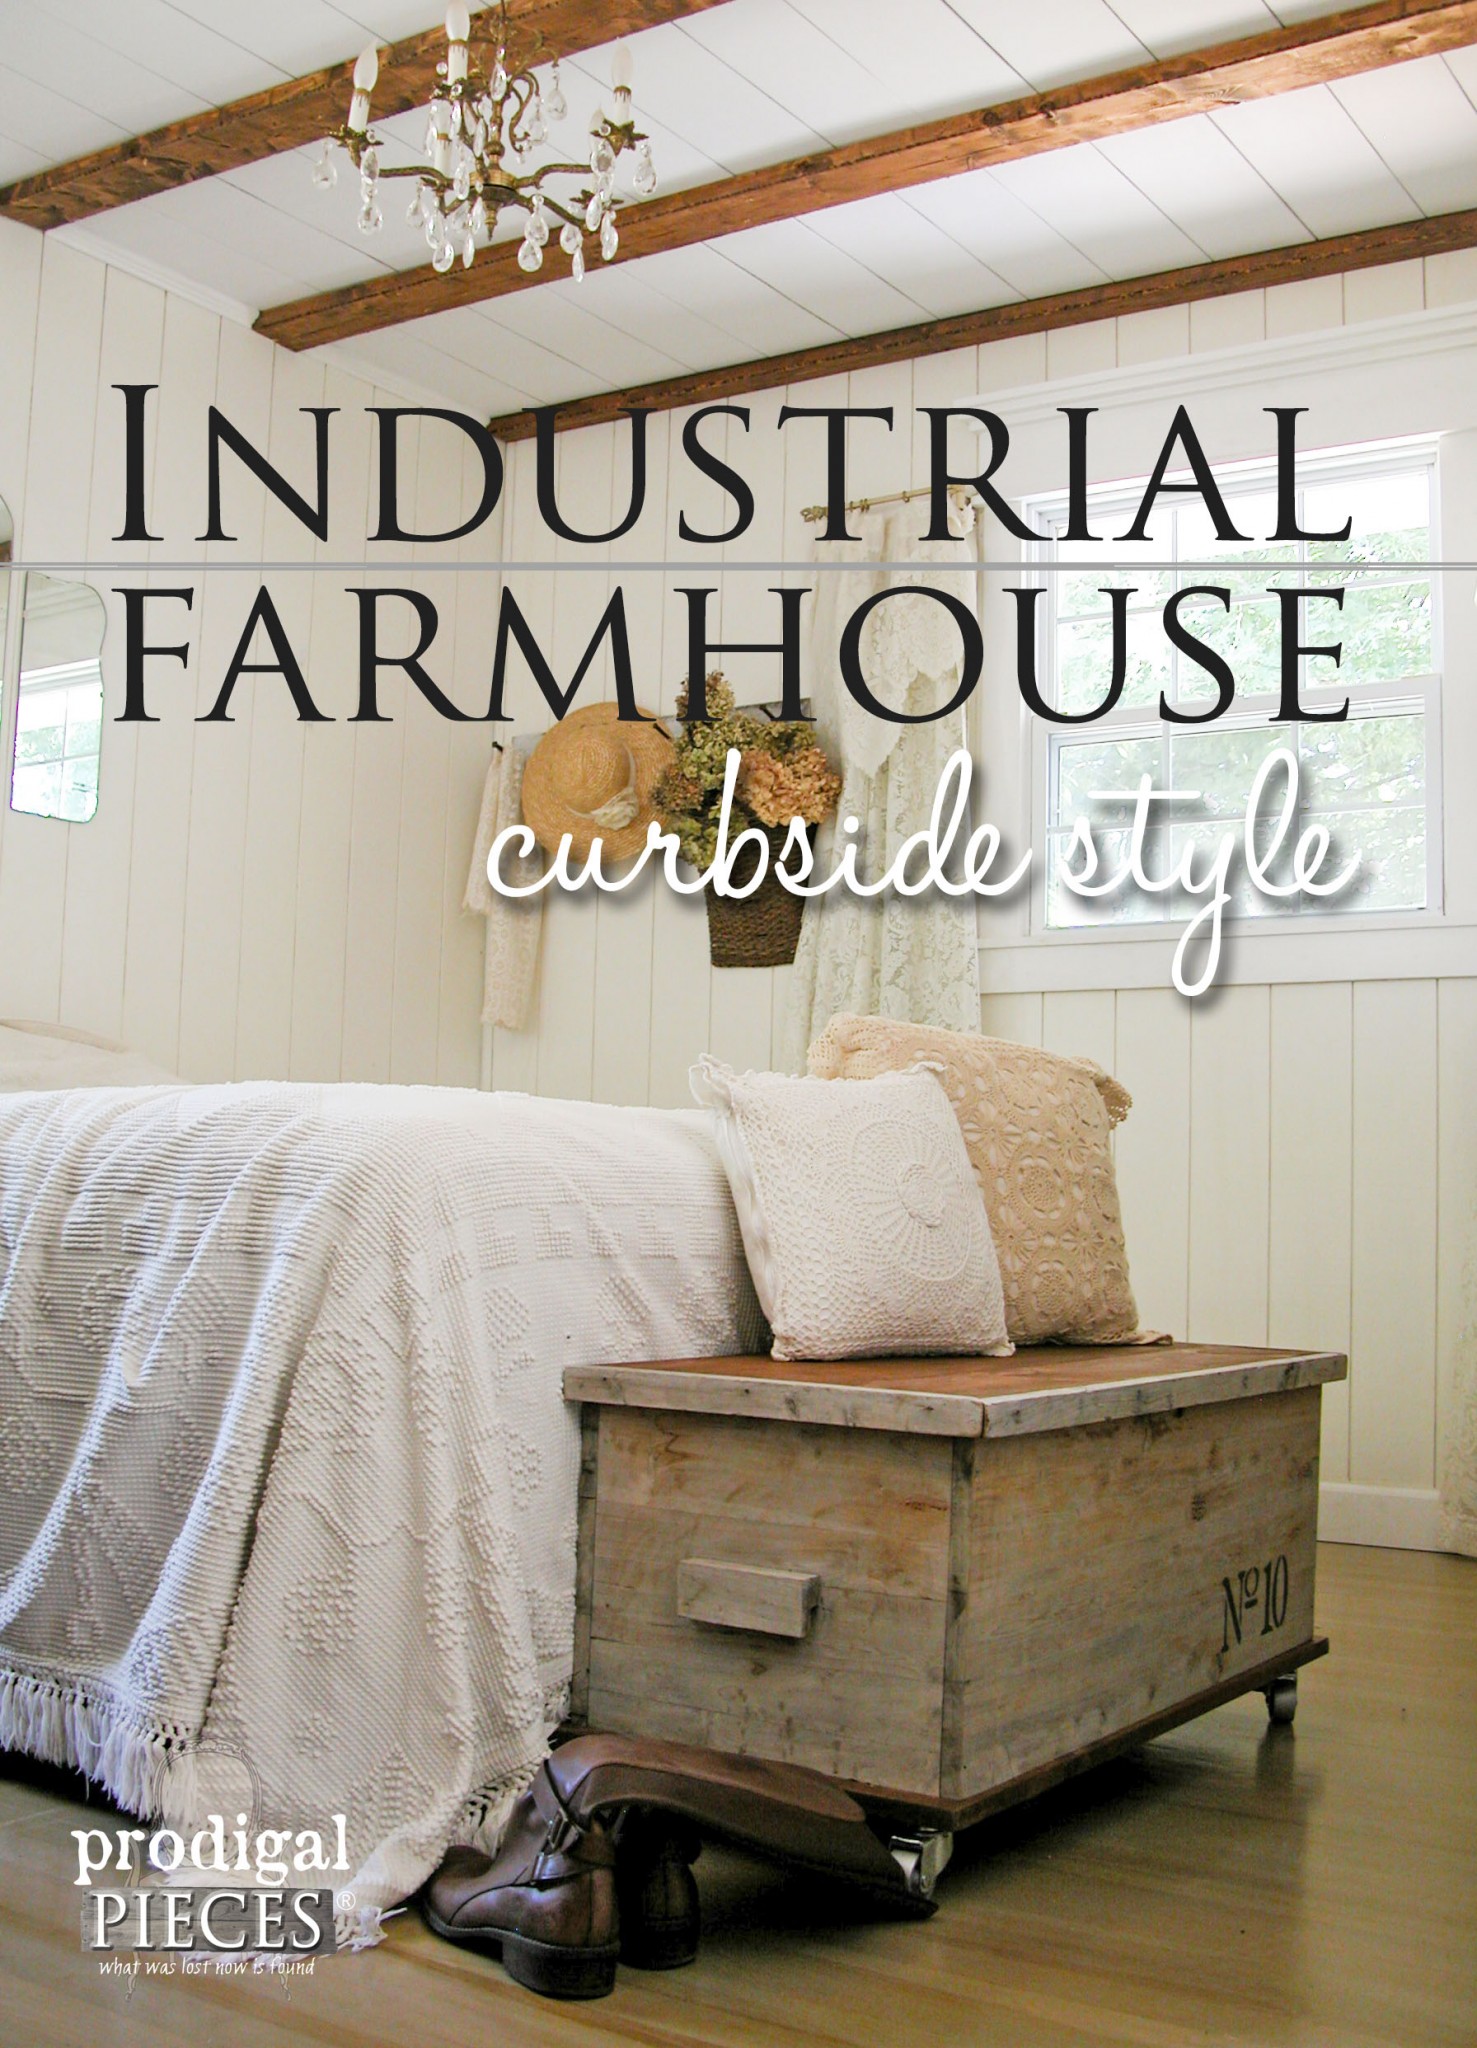 A Cedar Chest Found in the Trash Becomes Industrial Style Decor in this Farmhouse Bedroom by Prodigal Pieces | prodigalpieces.com